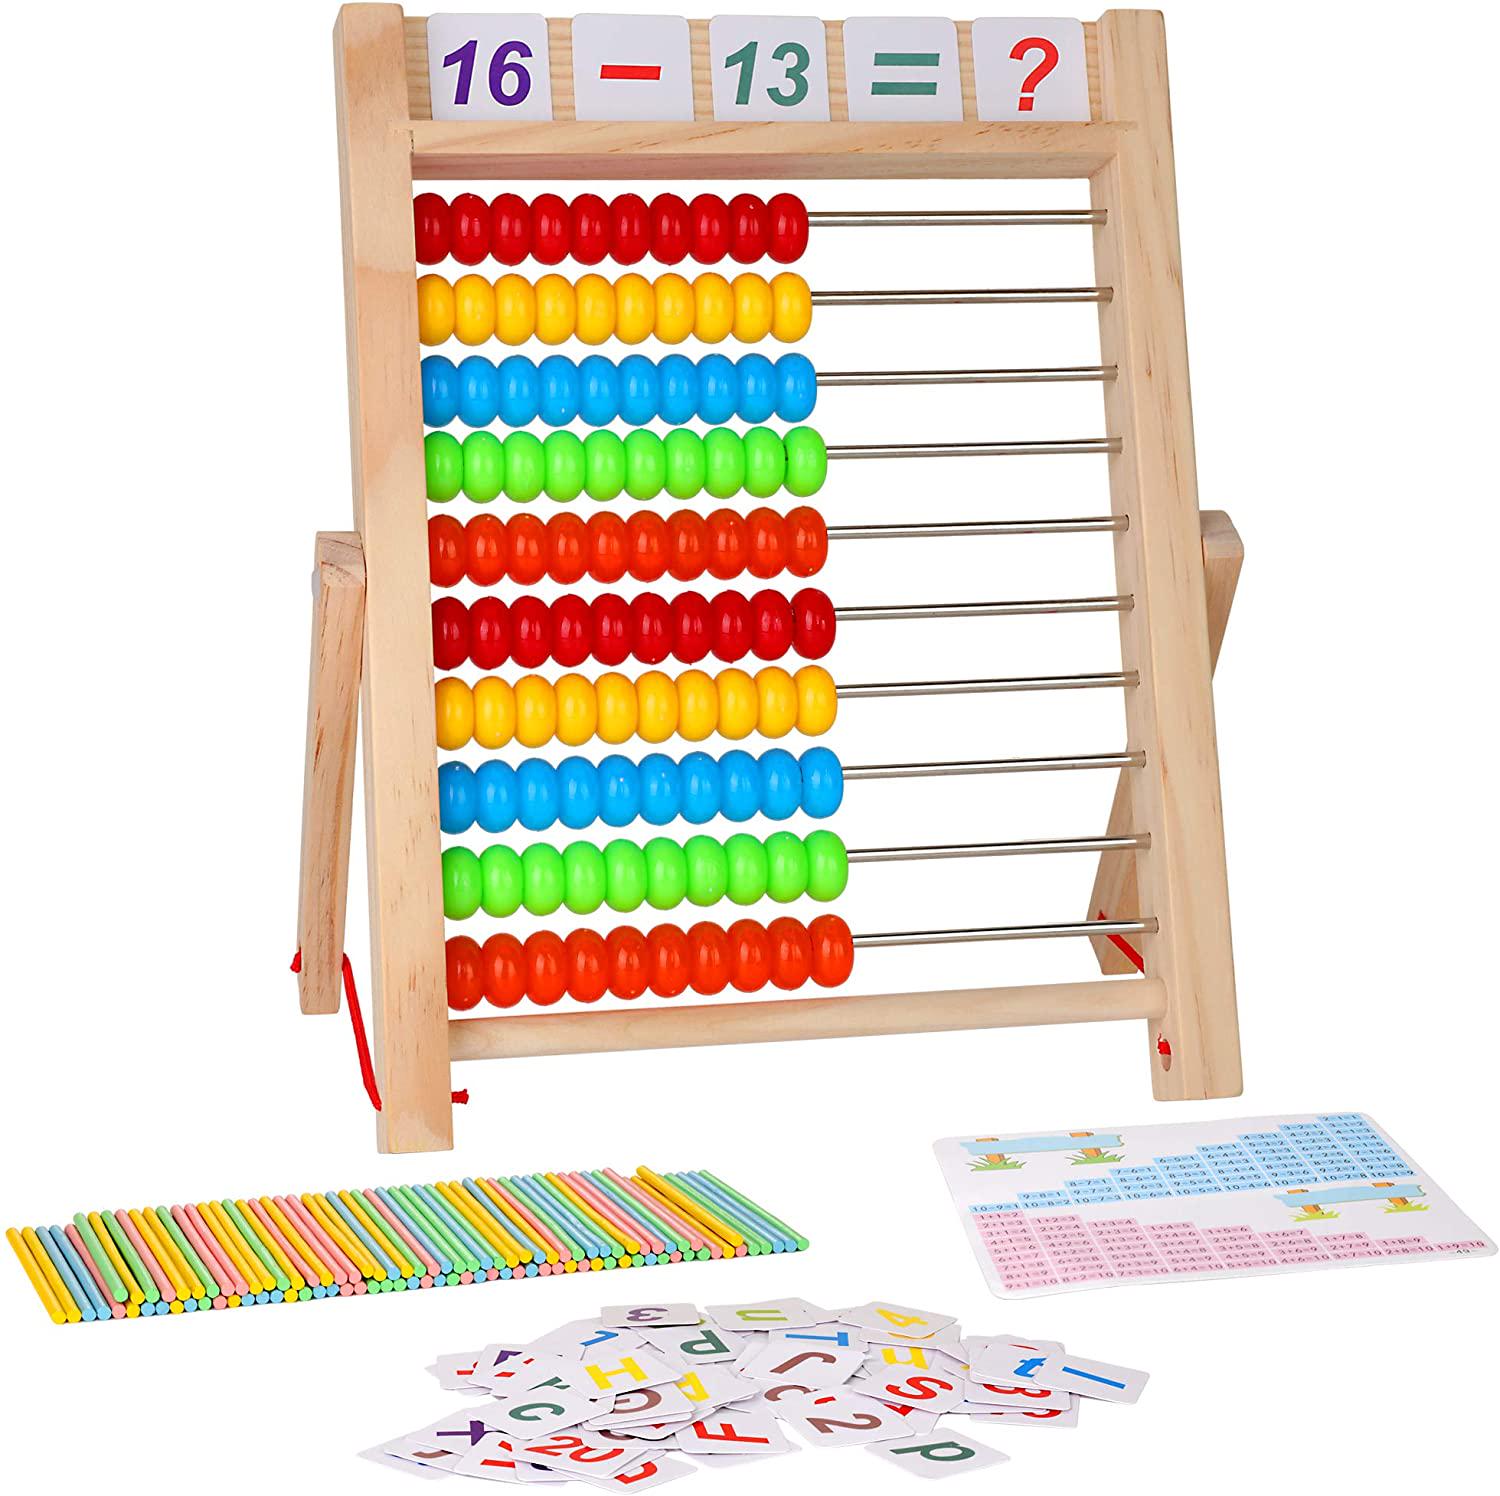 KIDWILL, KIDWILL Kids Learning Toy, 10-Row Wooden Frame Abacus with Multi-Color Beads, Counting Sticks, Number Alphabet Cards, Manipulative Math Calculating Tool Gift for 3+ Old Boys Girls